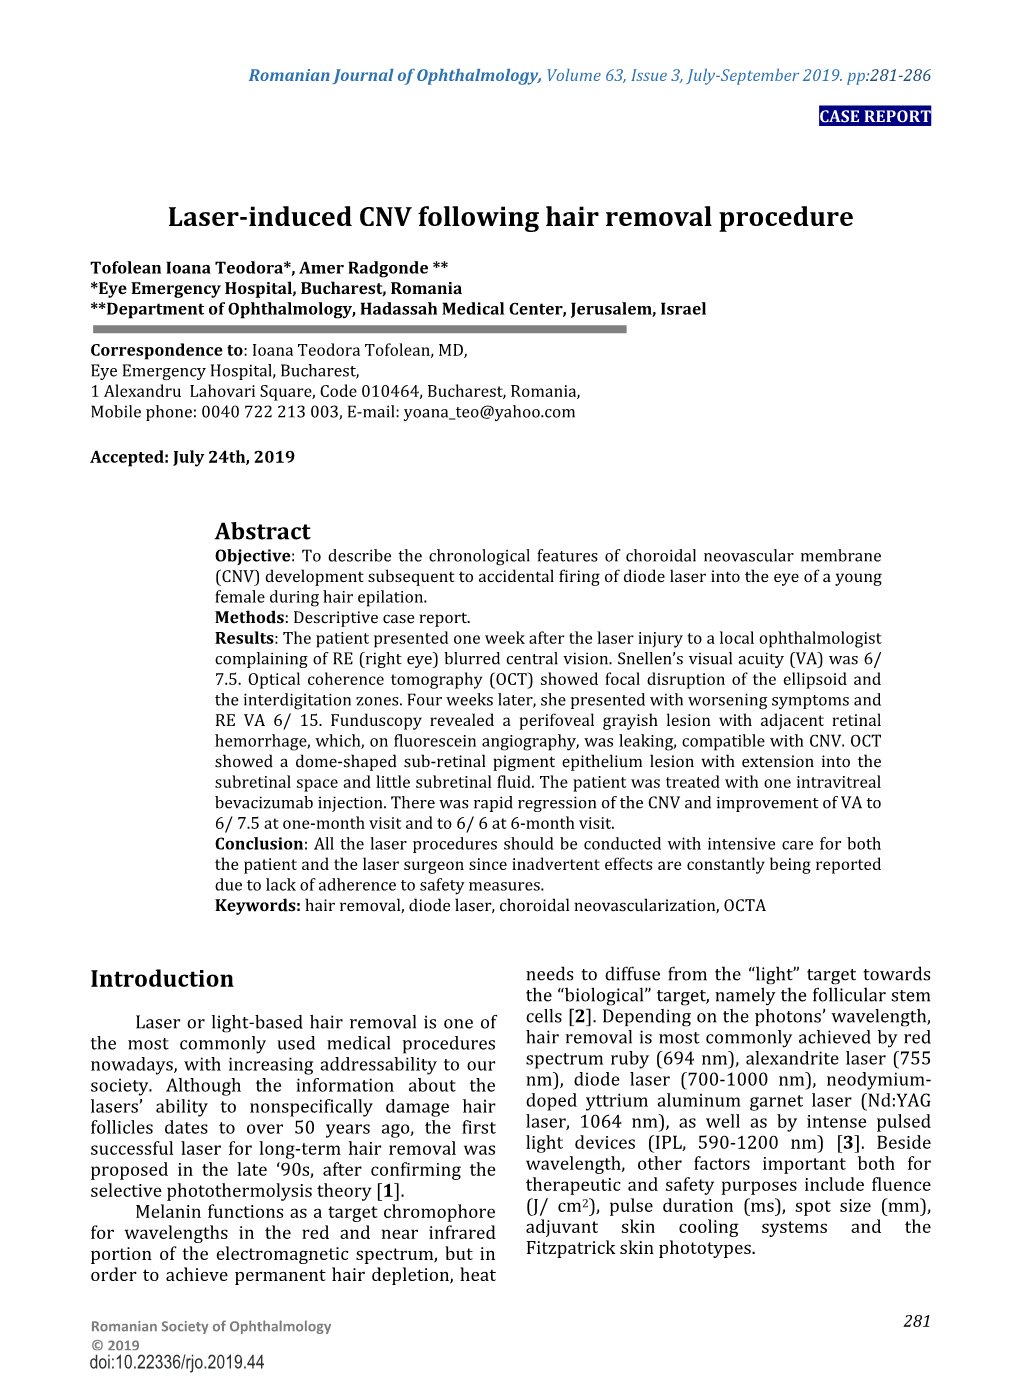 Laser-Induced CNV Following Hair Removal Procedure